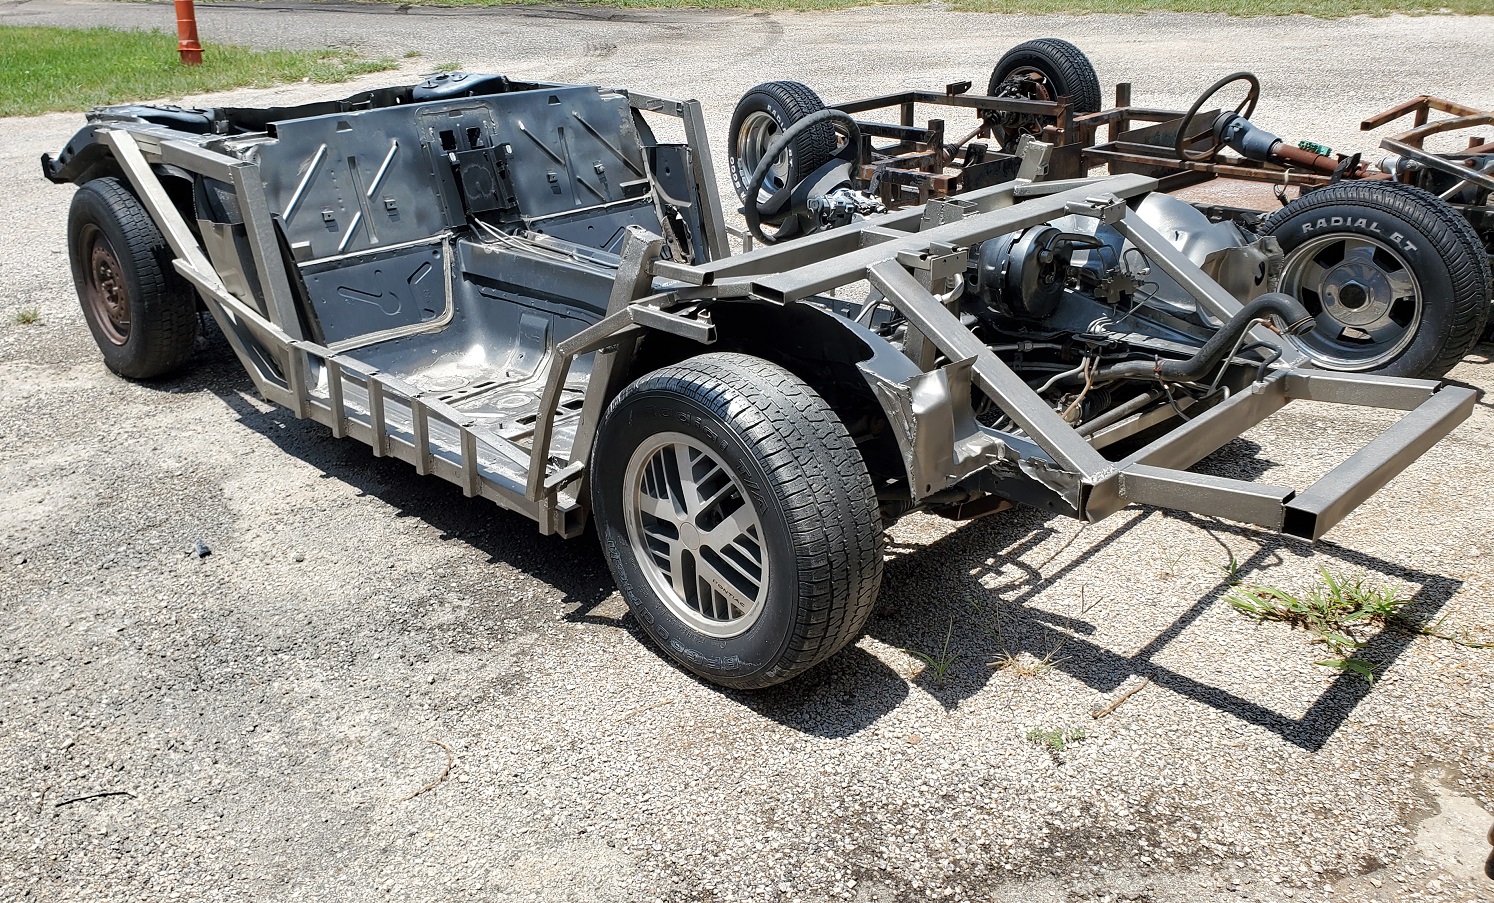 FOR SALE: Selling this Pontiac Fiero chassis roller, no engine and no trans...